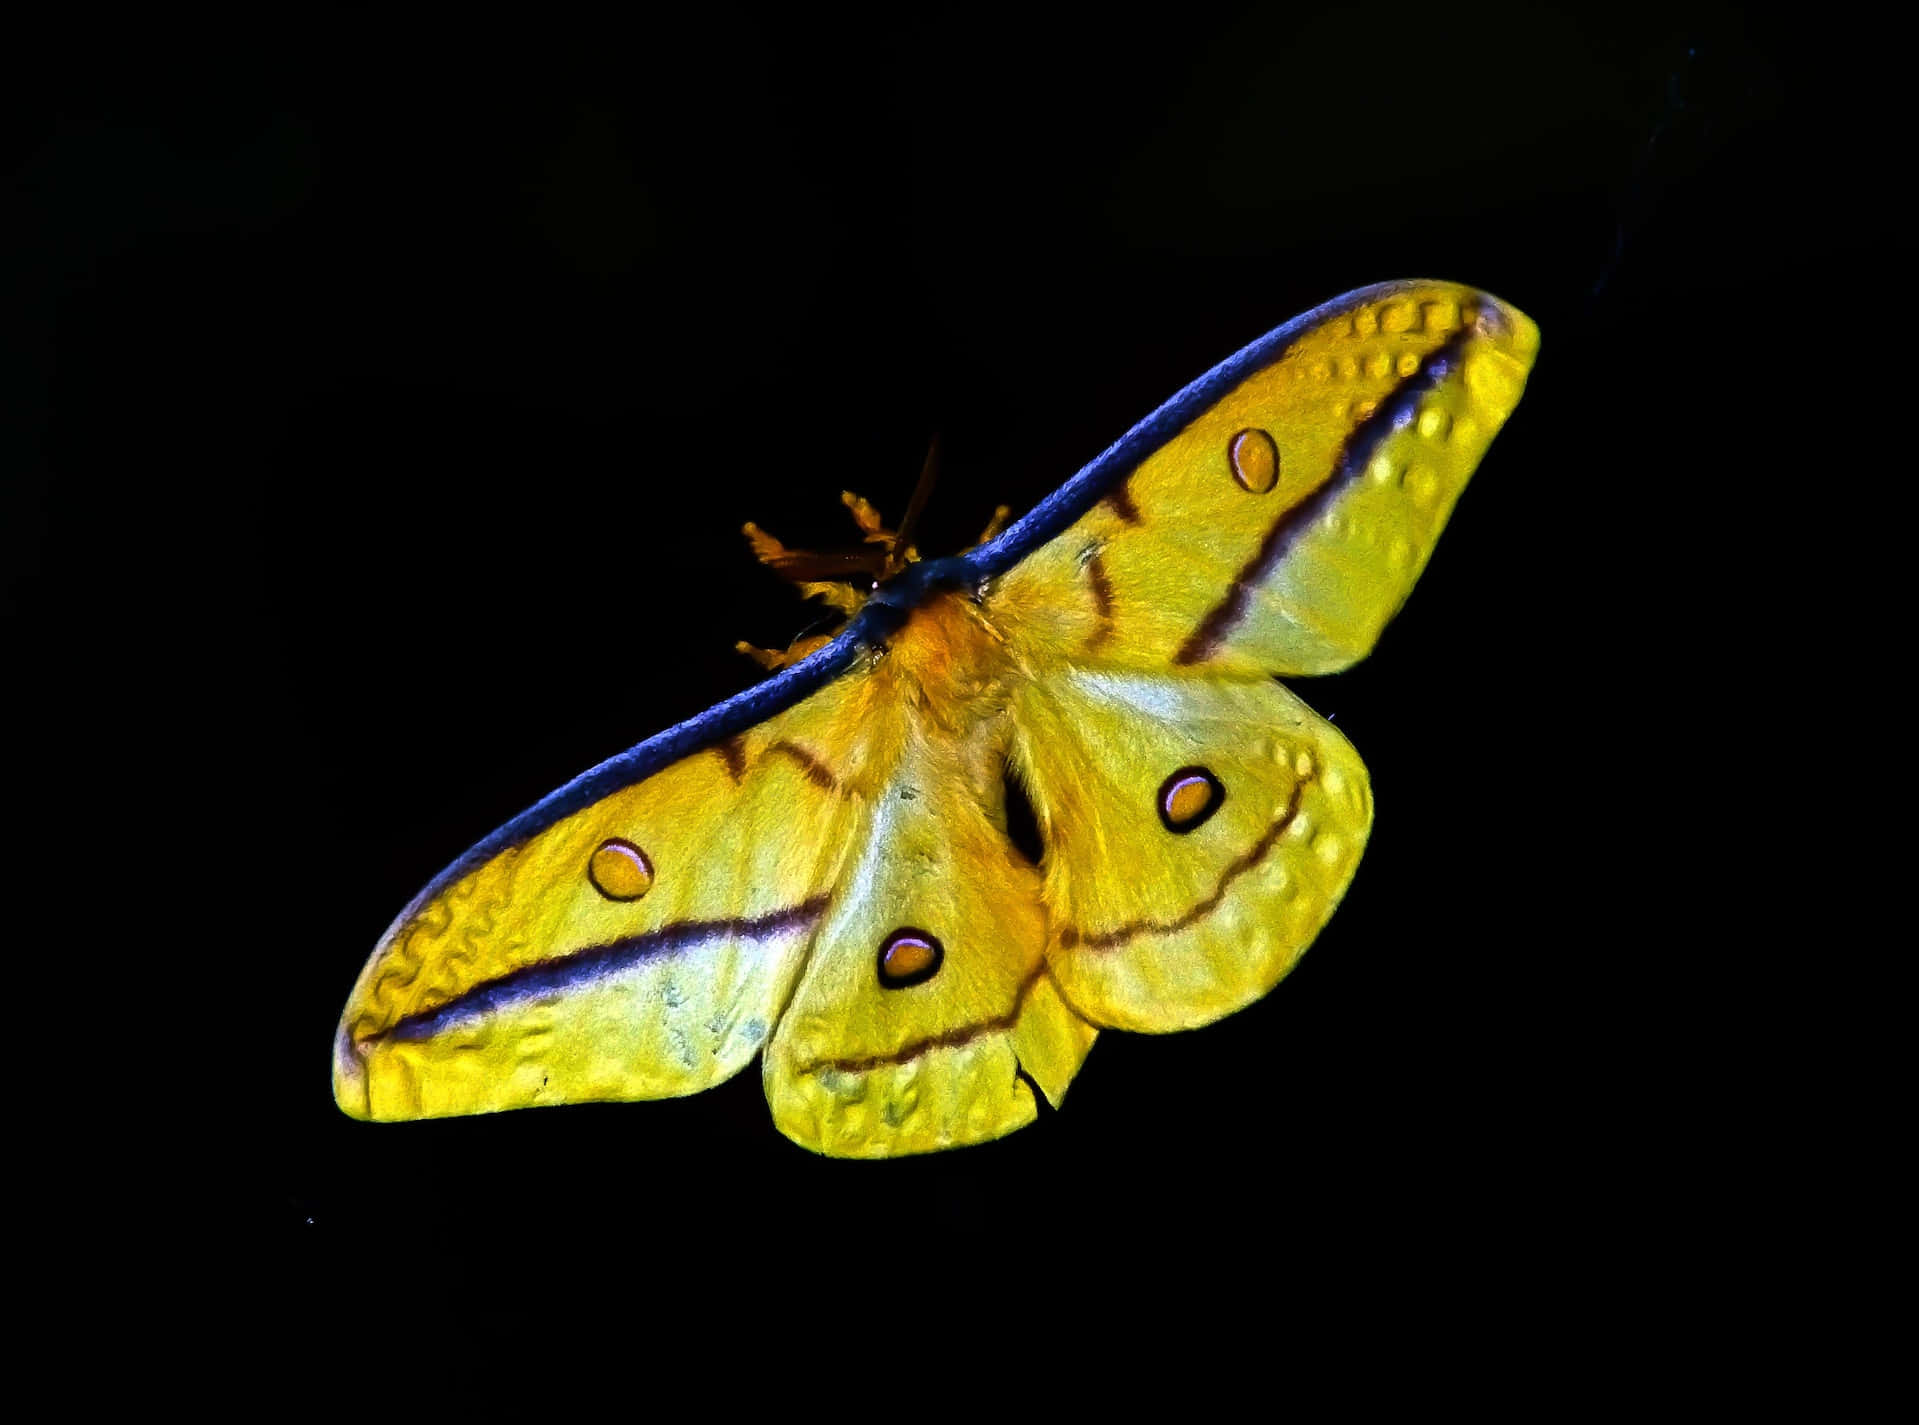 Stunning Yellow Butterfly in Nature Wallpaper